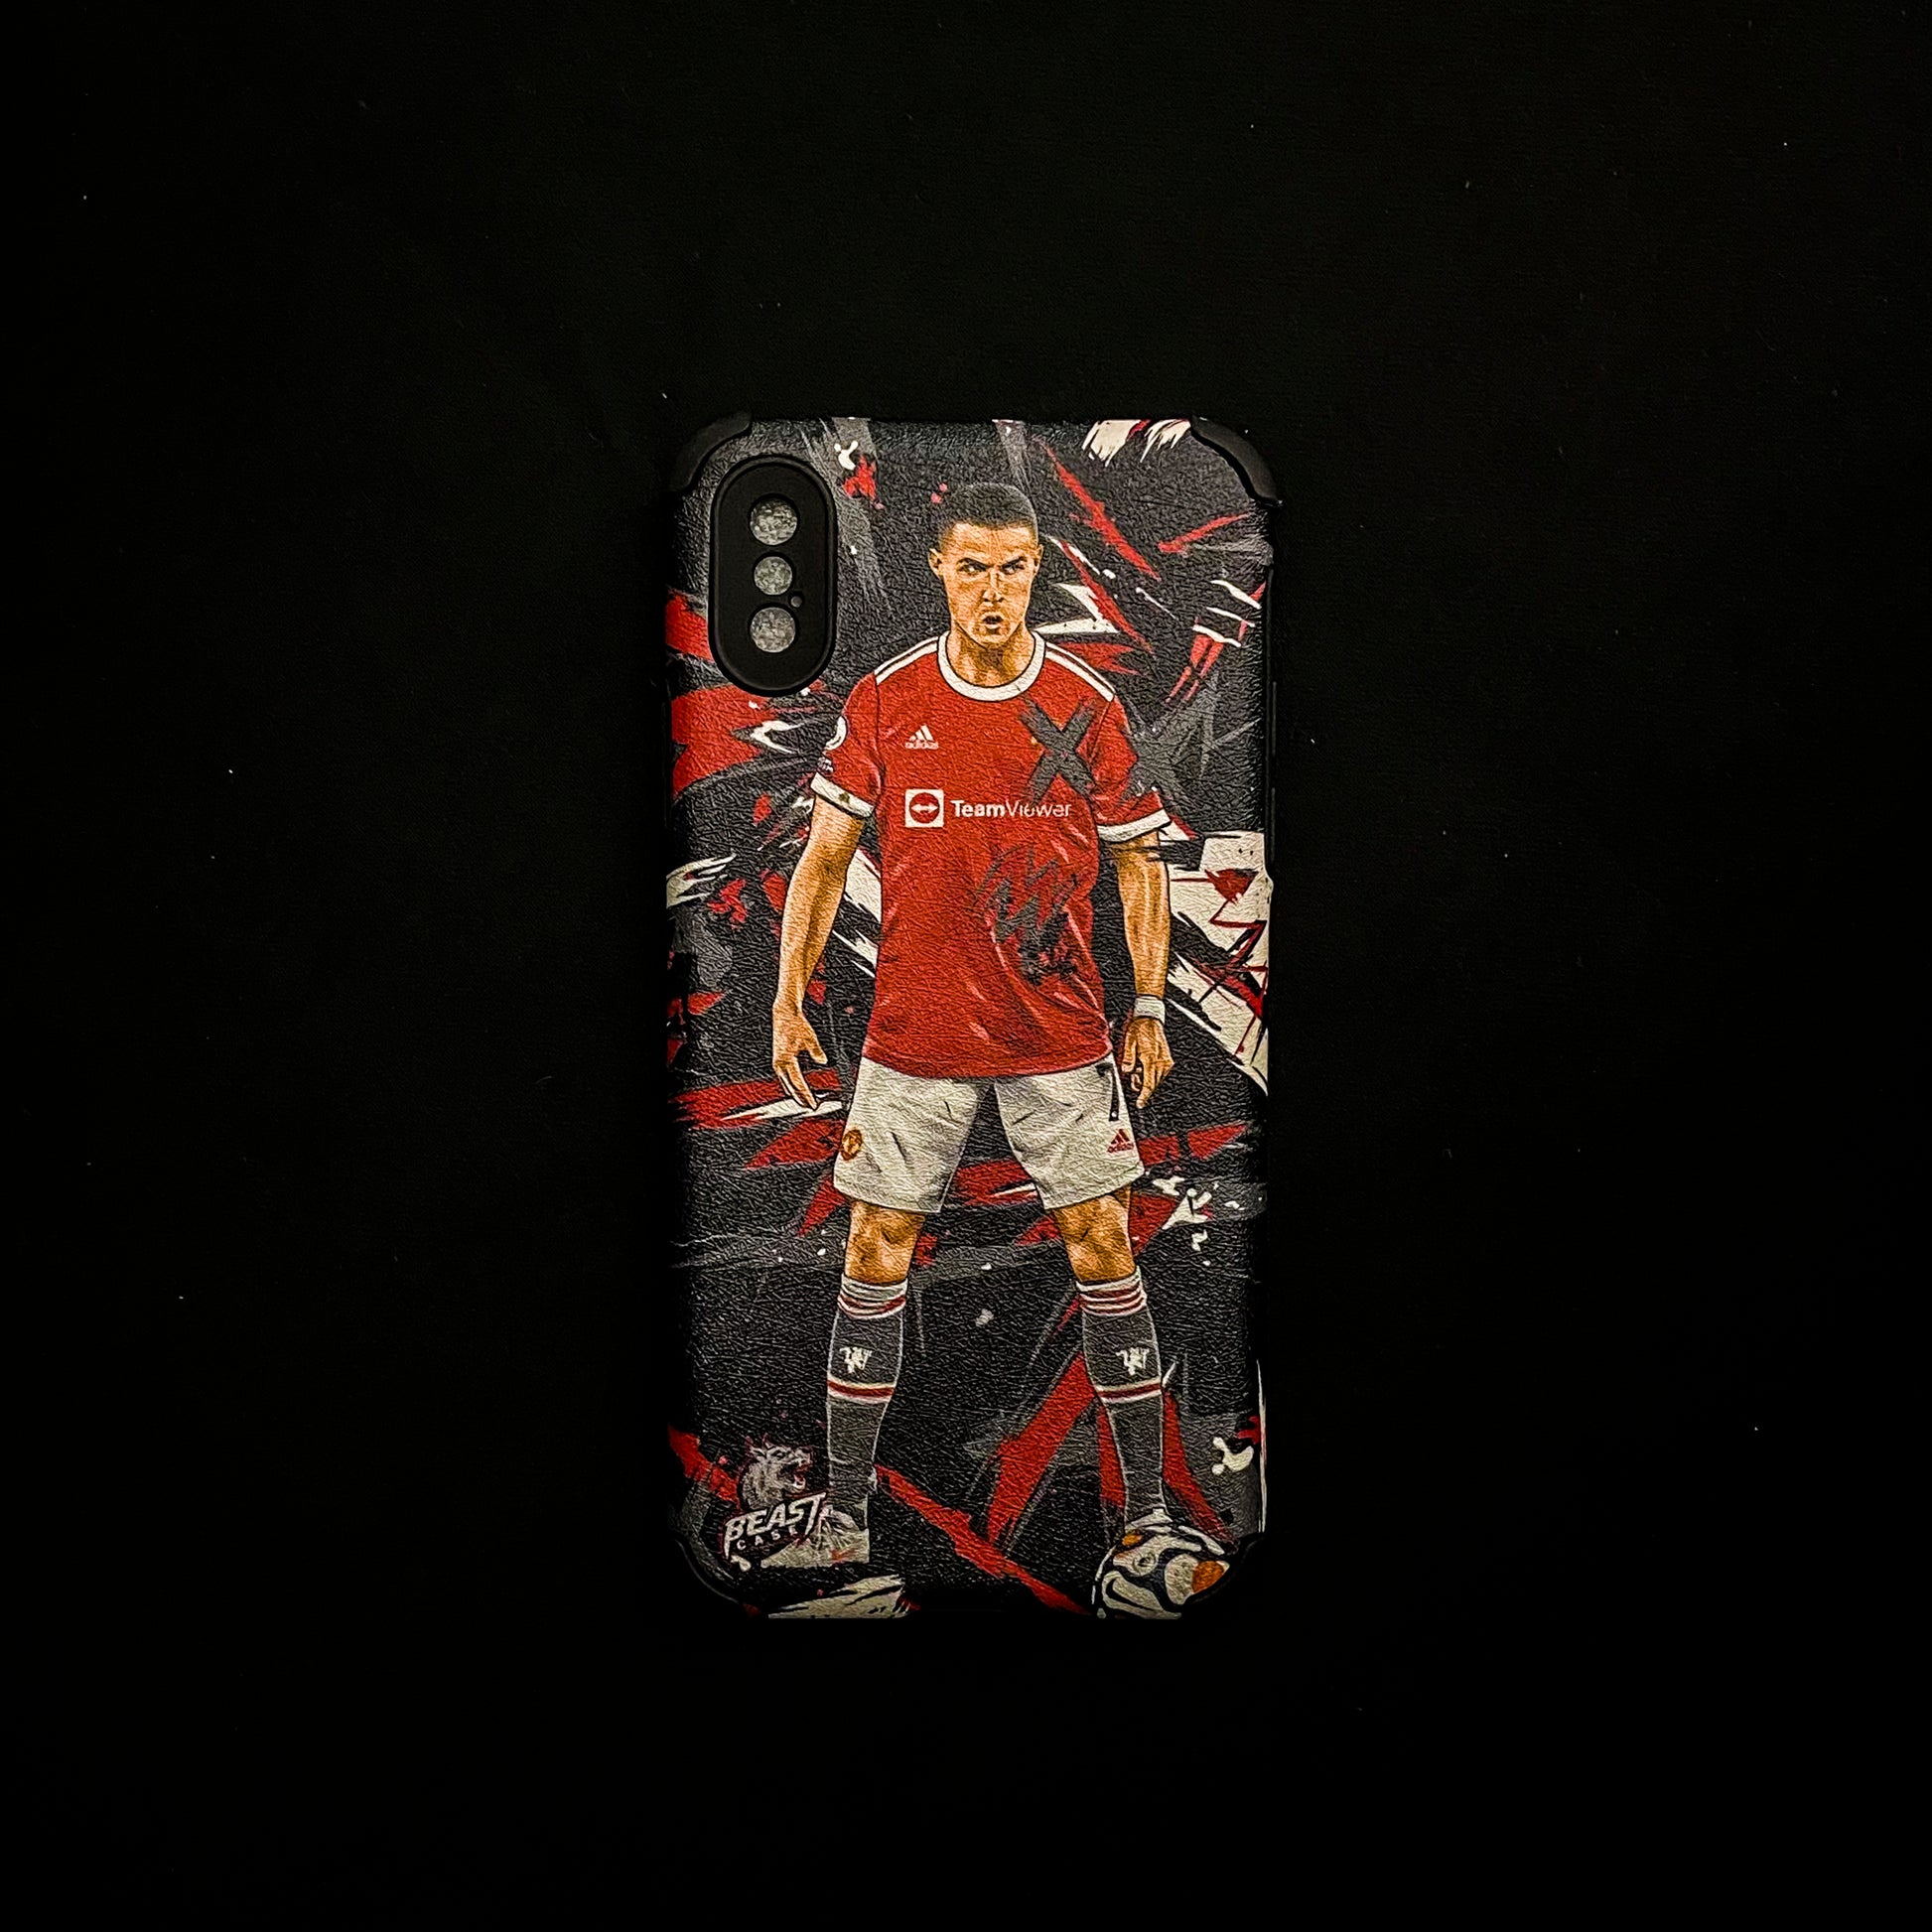 BEAST - CRISTIANO RONALDO 7 CASE - BEASTCASE | For Fans By Fans